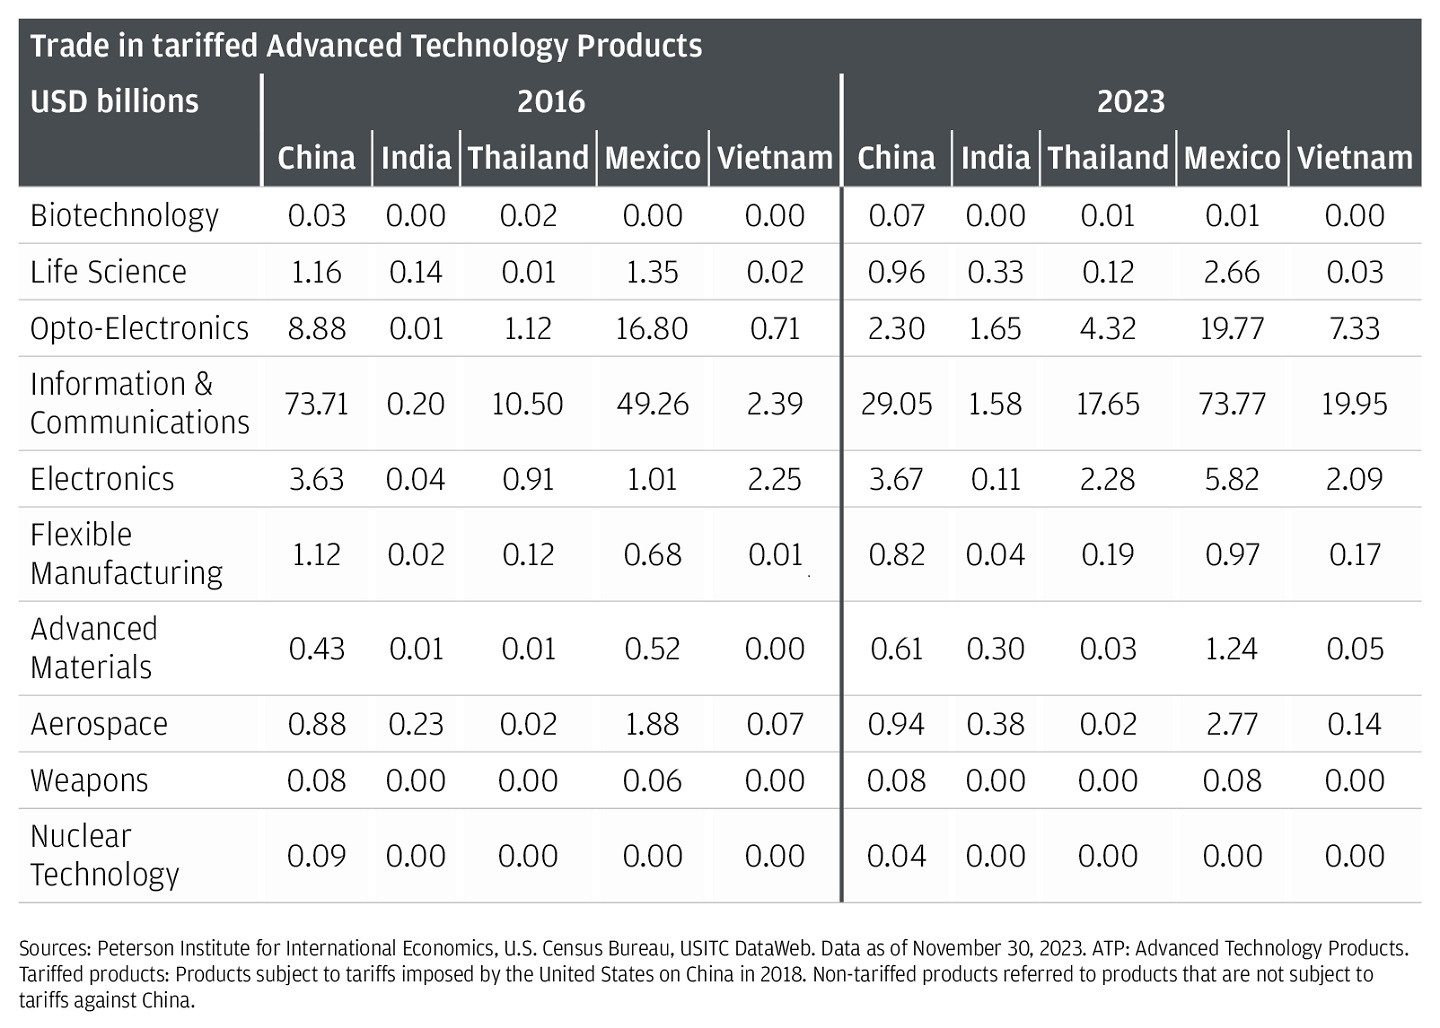 This table describes the trade of U.S. imports of Advanced Technology Products tariffed against China by country (China, India, Thailand, Mexico, Vietnam) in 2016 and 2023.